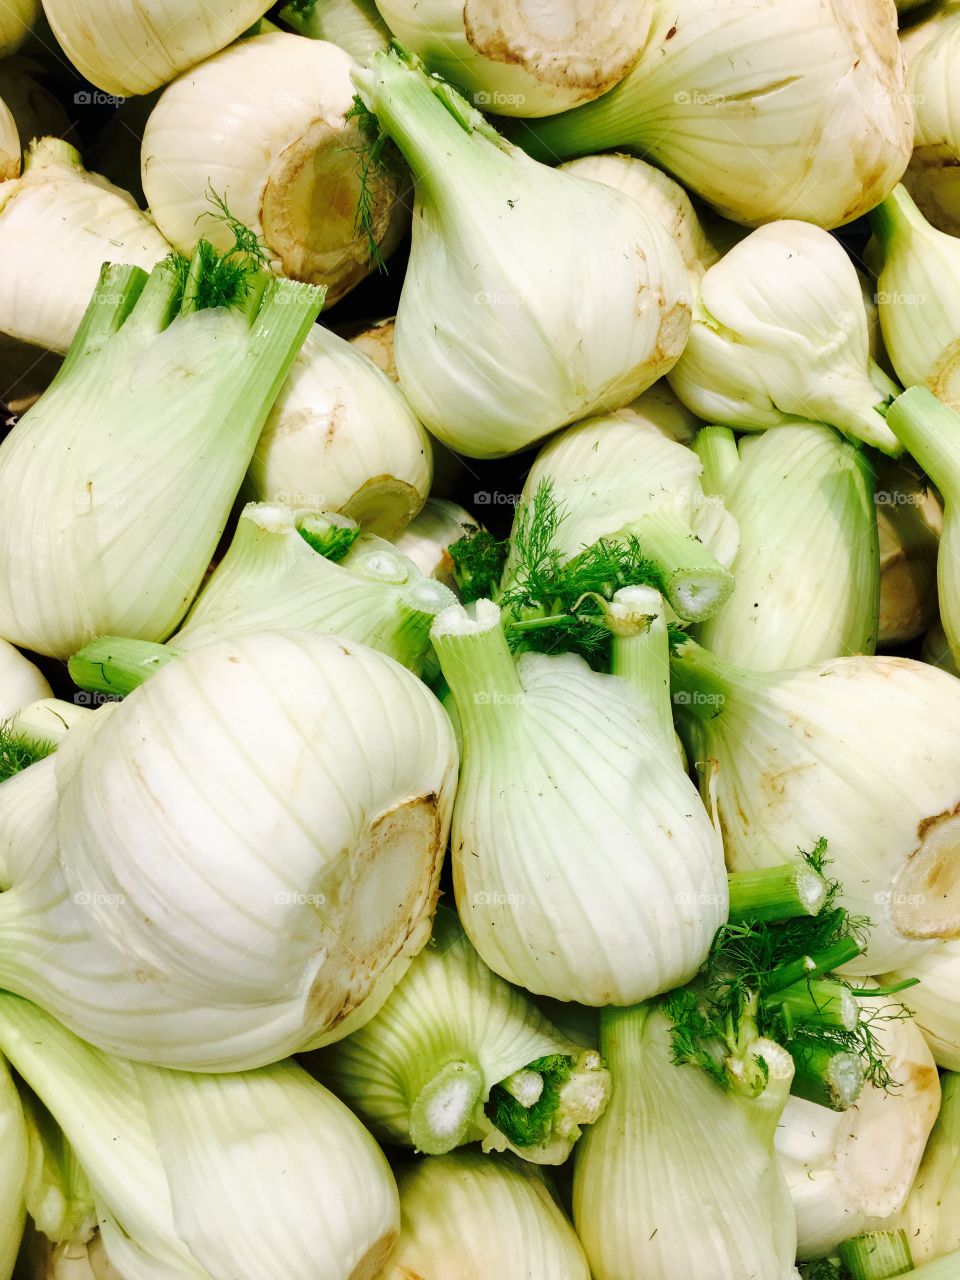 fennel anise